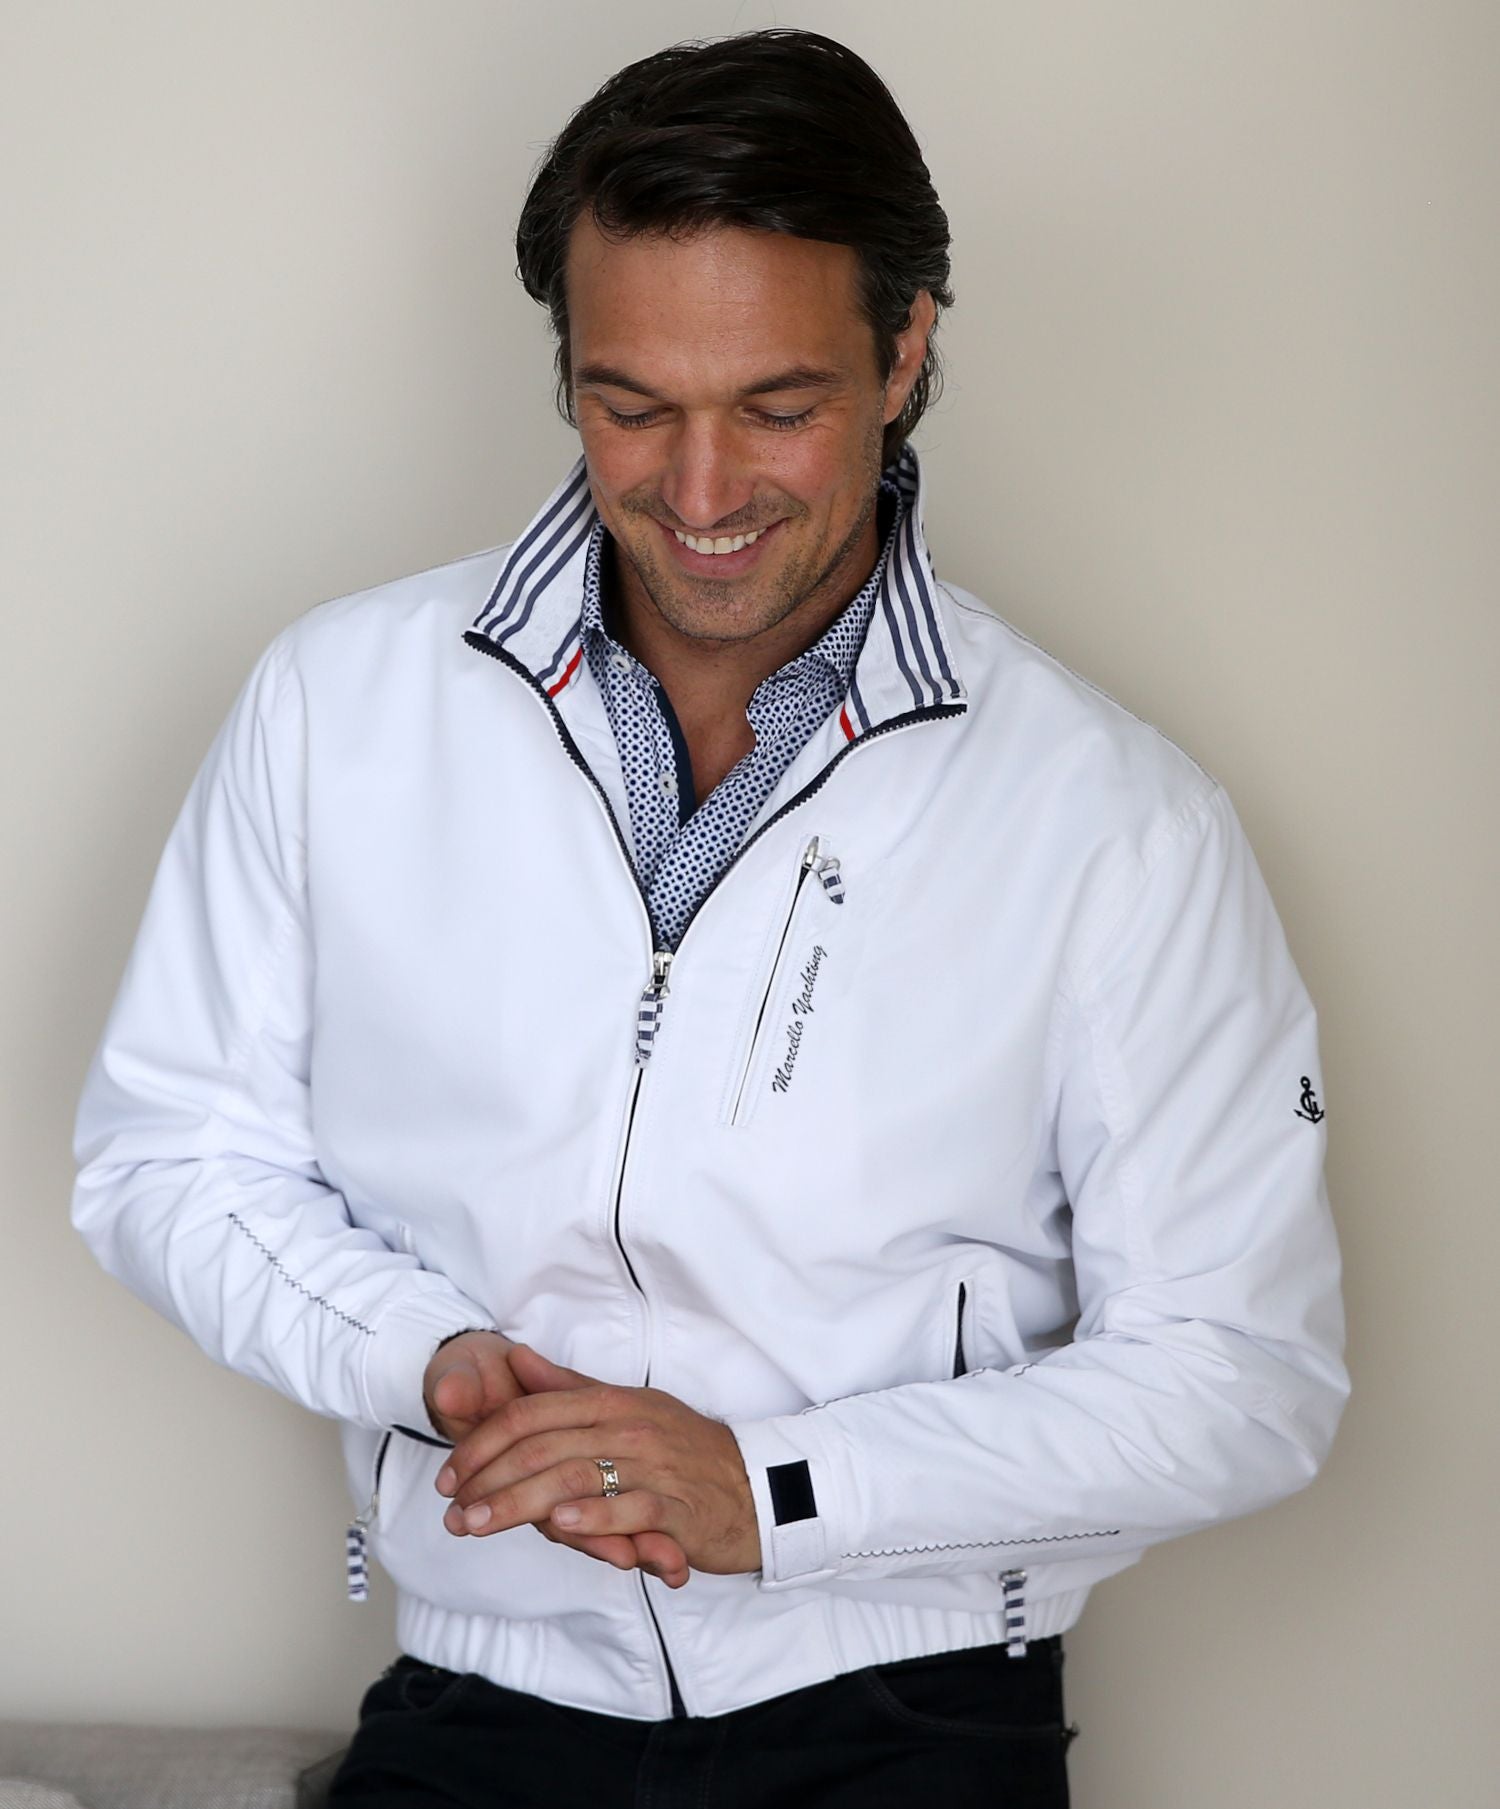 Following up on our exclusive Navigare bomber, the soft microfiber fabric with nautical detailing in contrast navy colors is uniquely cool.  Synthetic microfiber is lightweight, soft and durable. The white color gives the jacket a clean crisp look with a maritime vibe.  Stretch waist for comfort, velcro closure cuffs and a standup collar with contrast color detailing. Marcello White Nautical Jacket